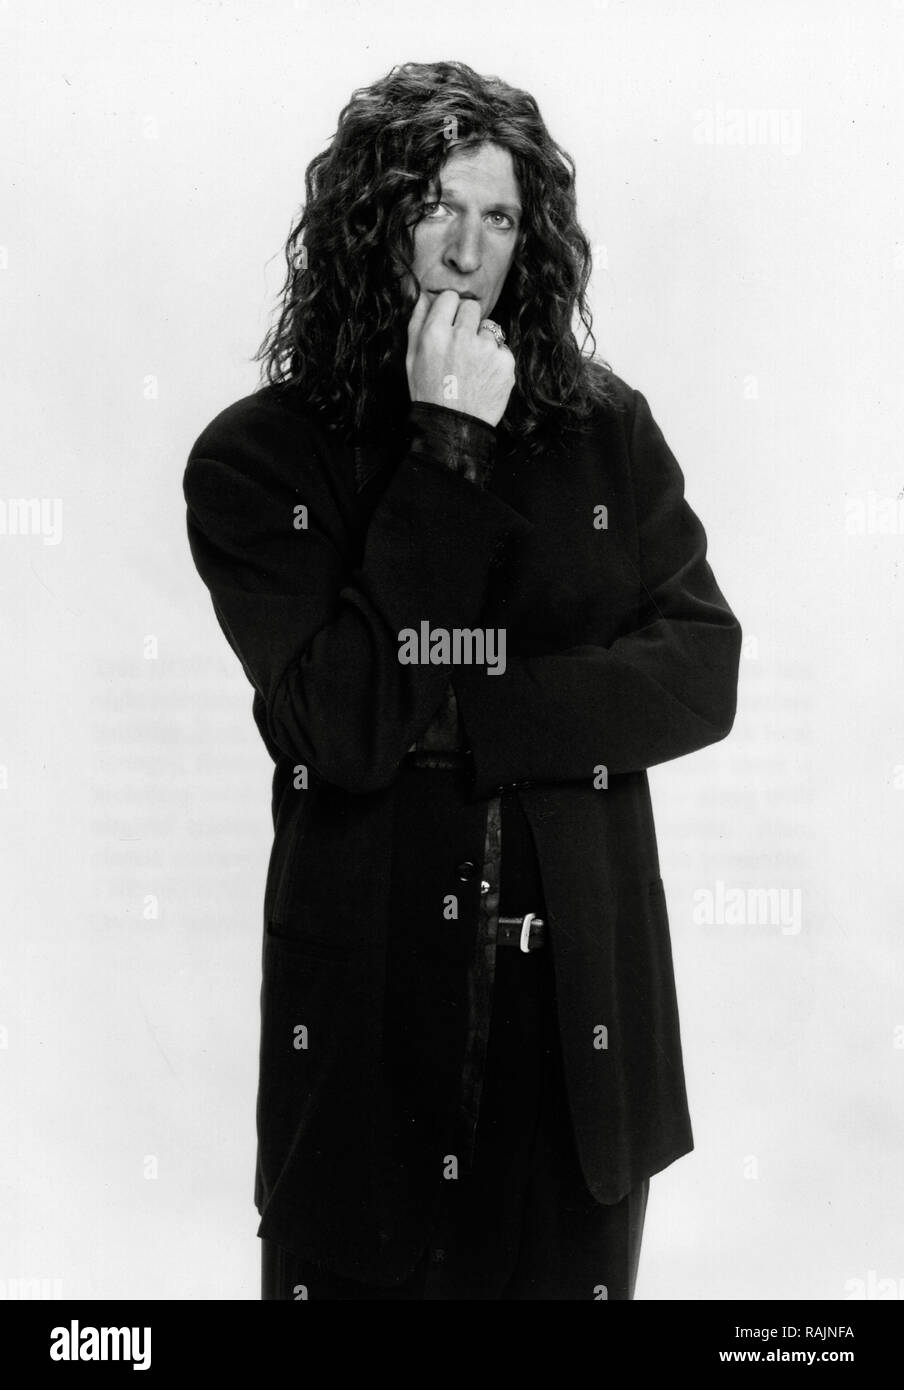 Publicity photo of Howard Stern,  circa 1998  File Reference # 33636 879THA Stock Photo